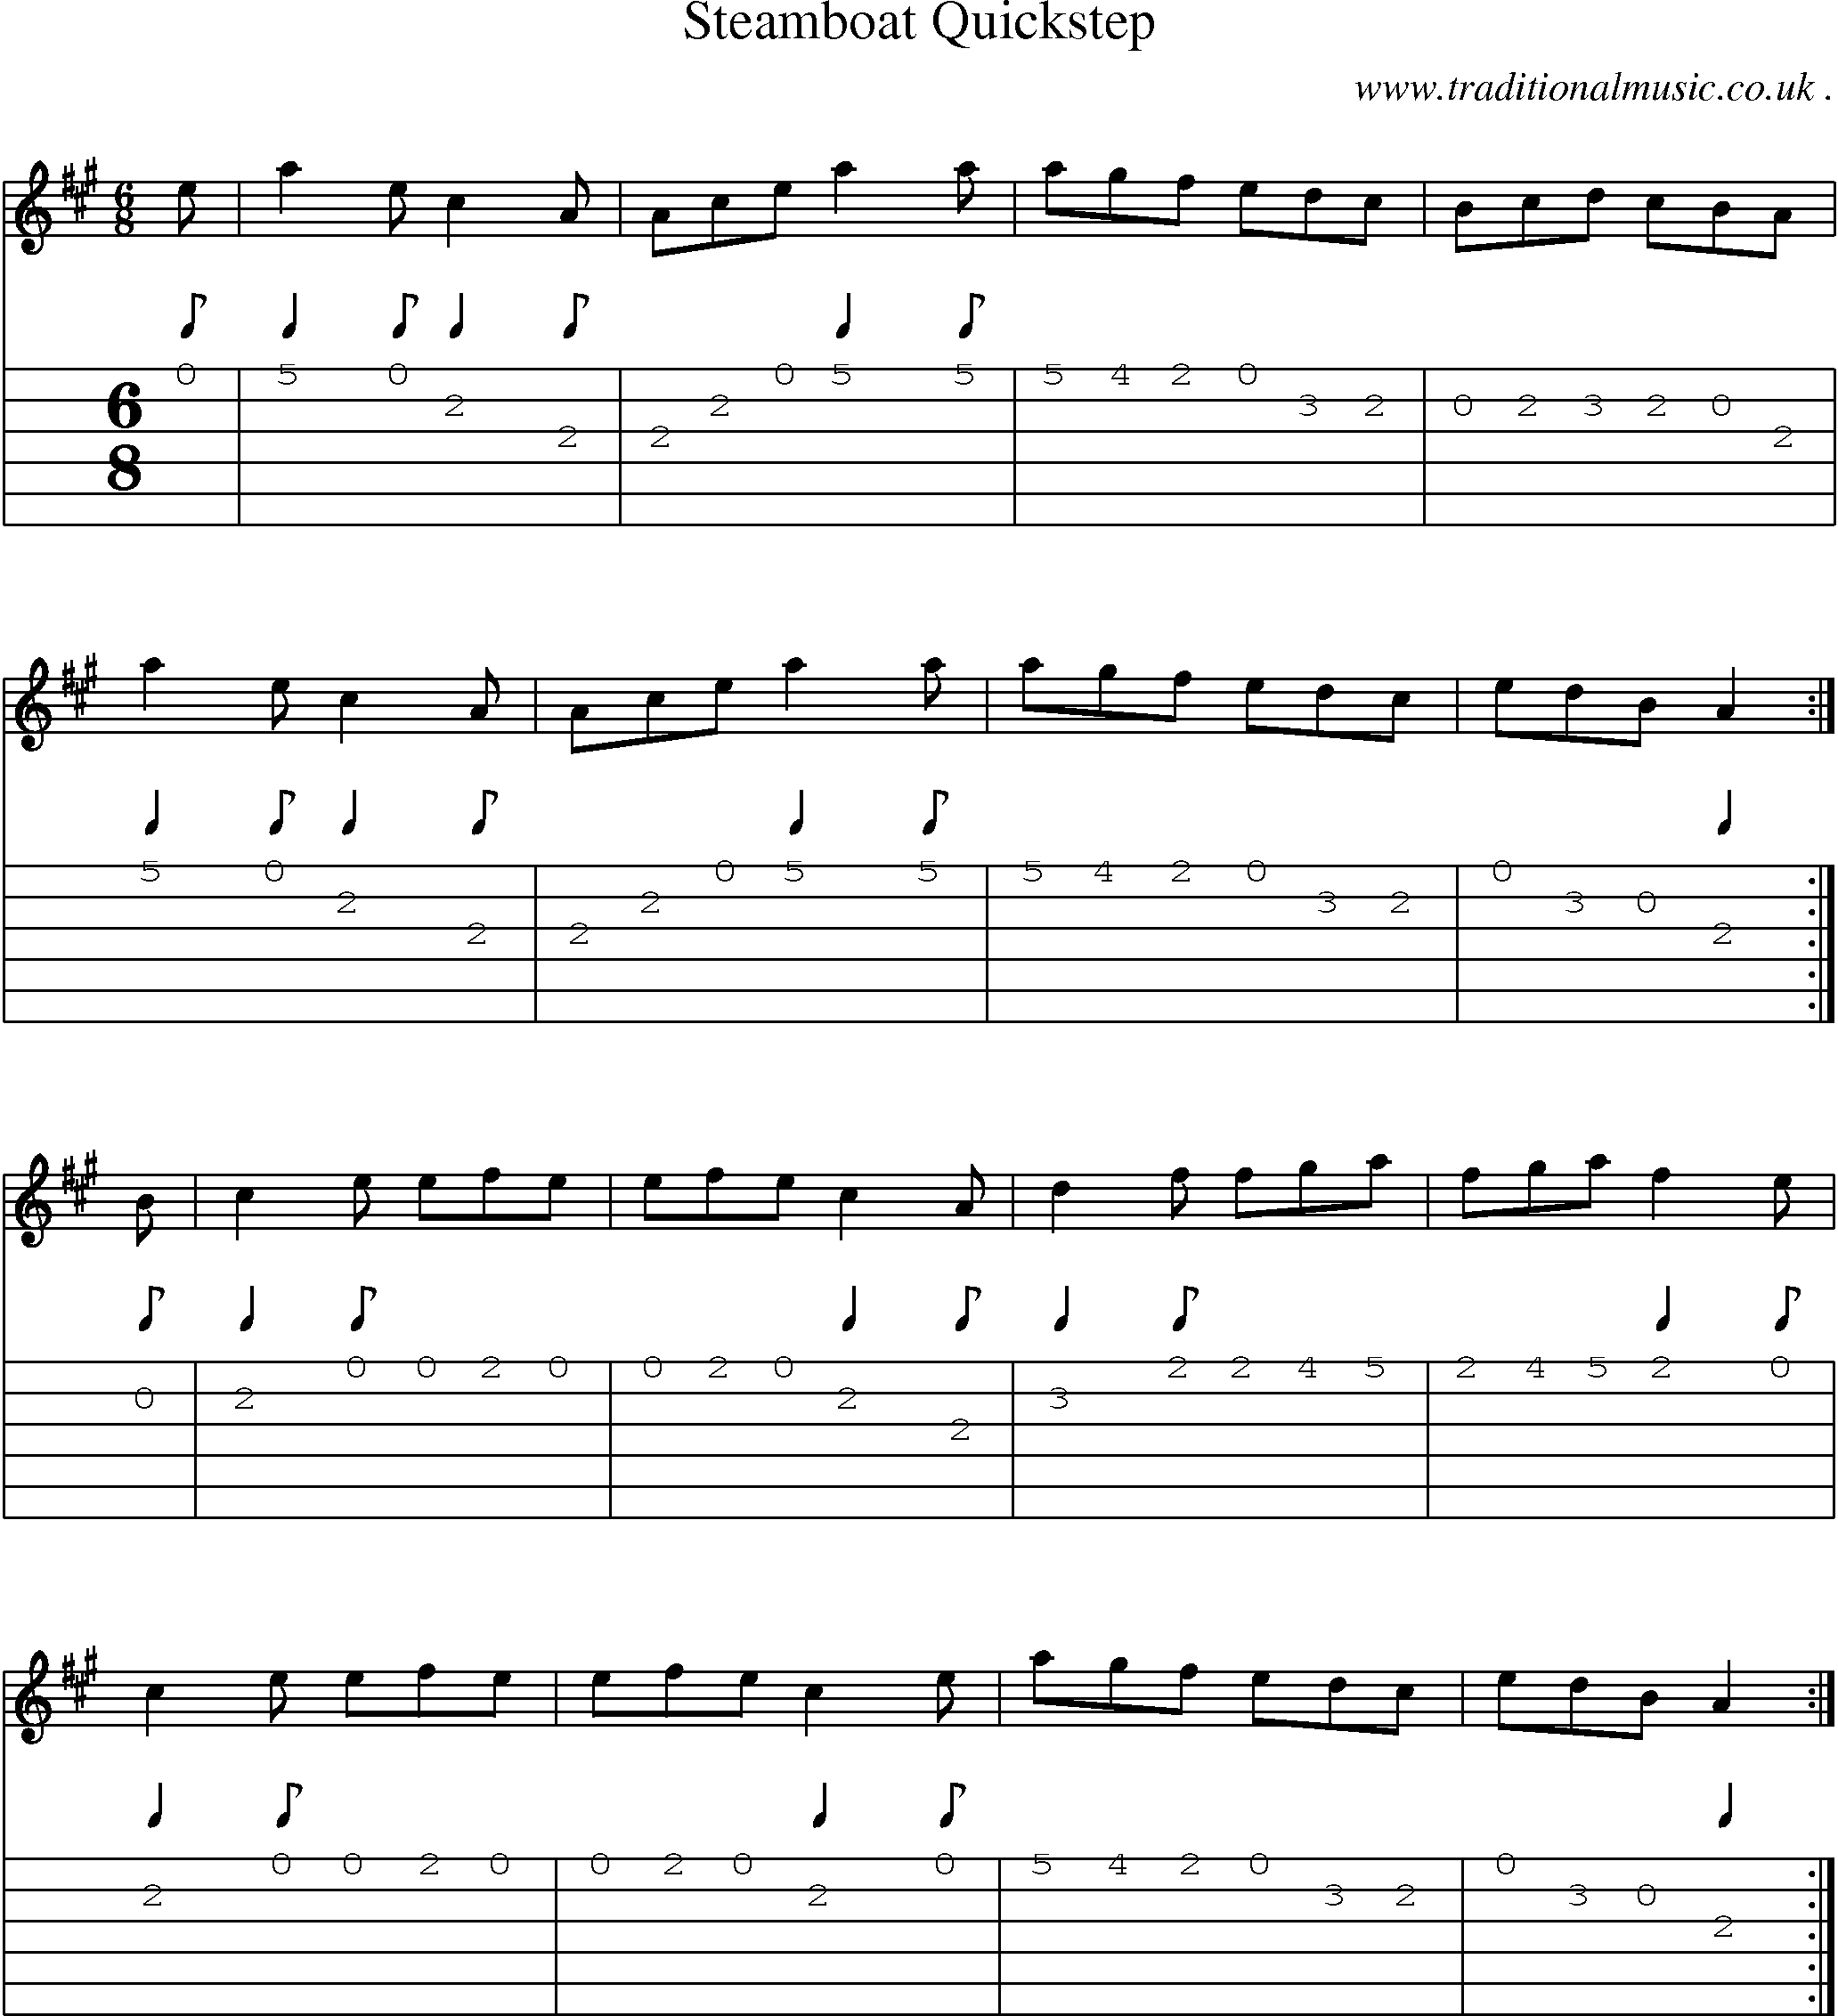 Sheet-Music and Guitar Tabs for Steamboat Quickstep